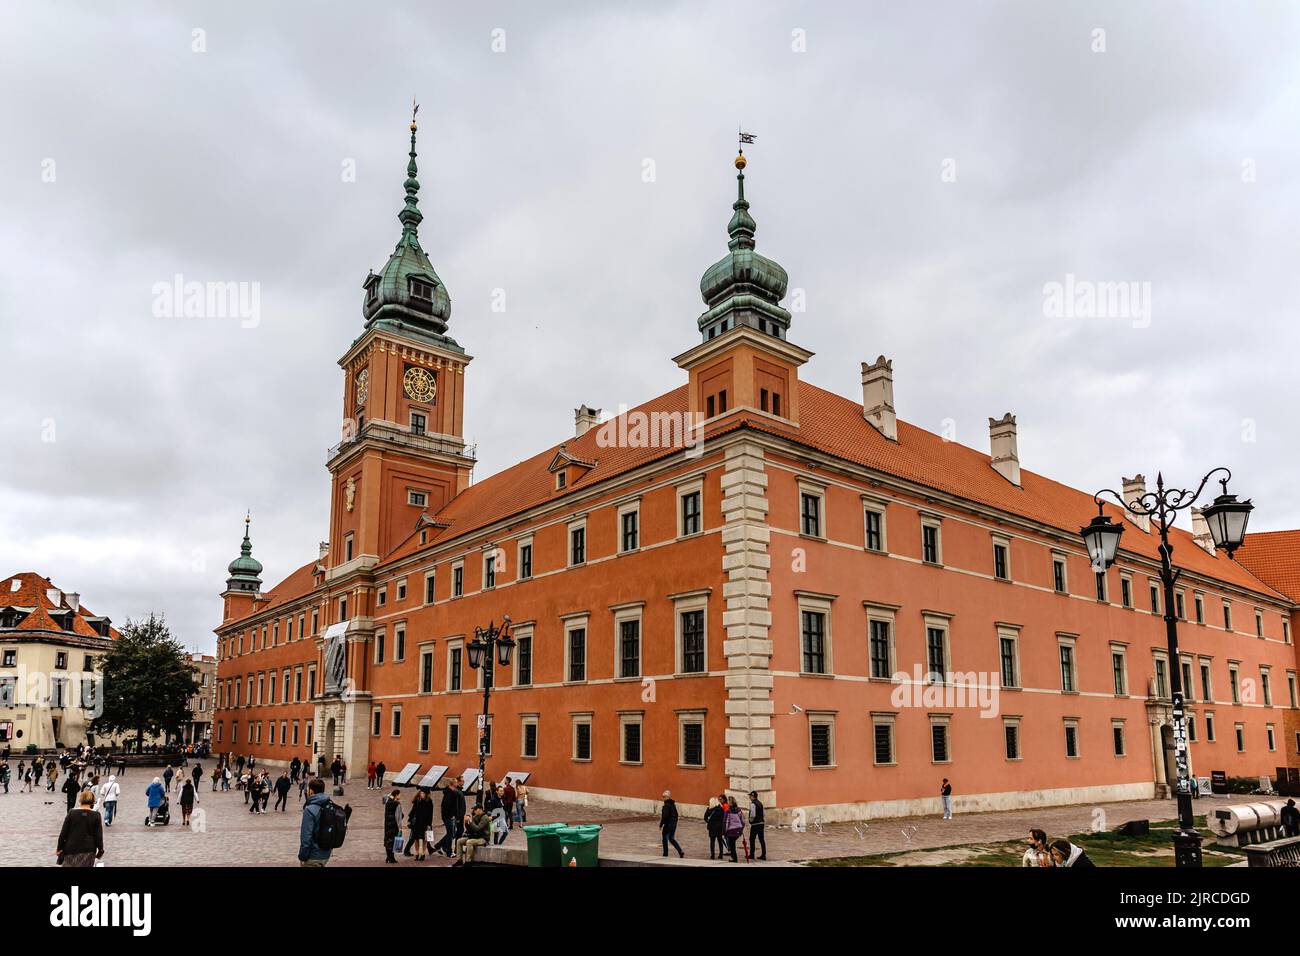 Warsaw,Poland-September 18,2021.The Royal Castle with Sigismund tower situated in Castle Square,entrance to Old Town,facade built of bricks.Polish Stock Photo